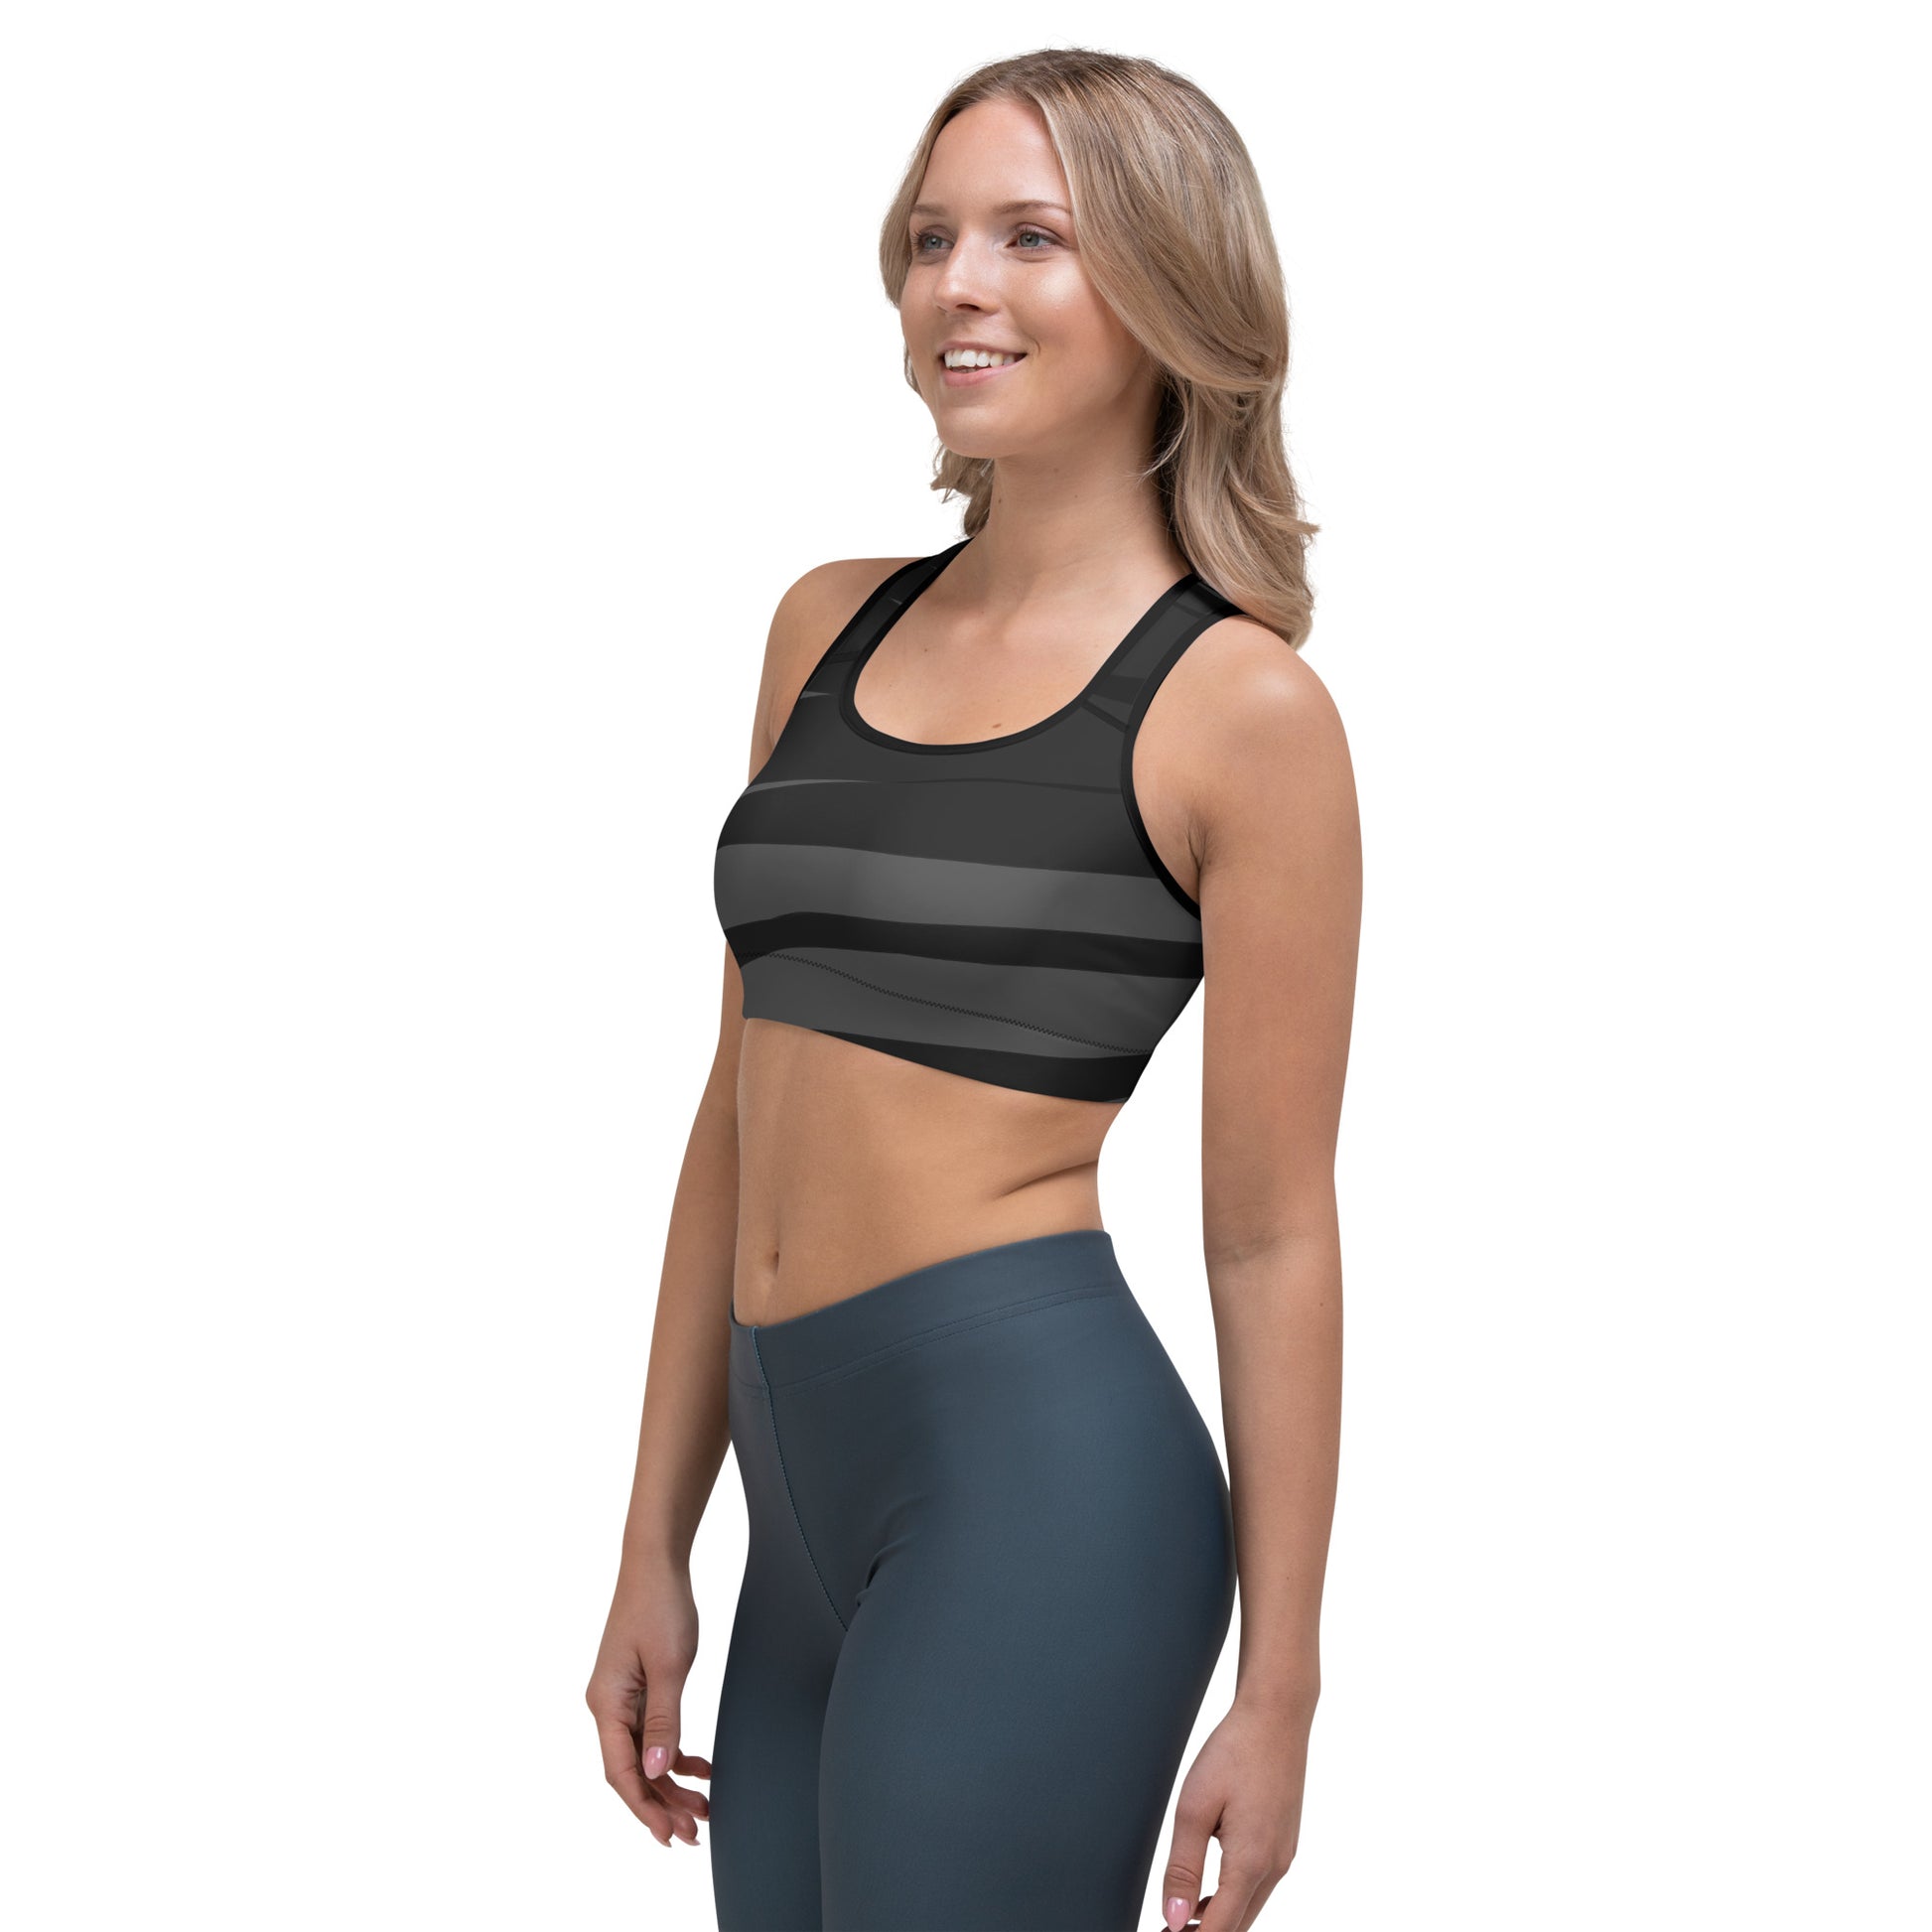 Introducing the Black H Stripes BeSculpt Women Sports Bra—a stylish and supportive essential for your active lifestyle!